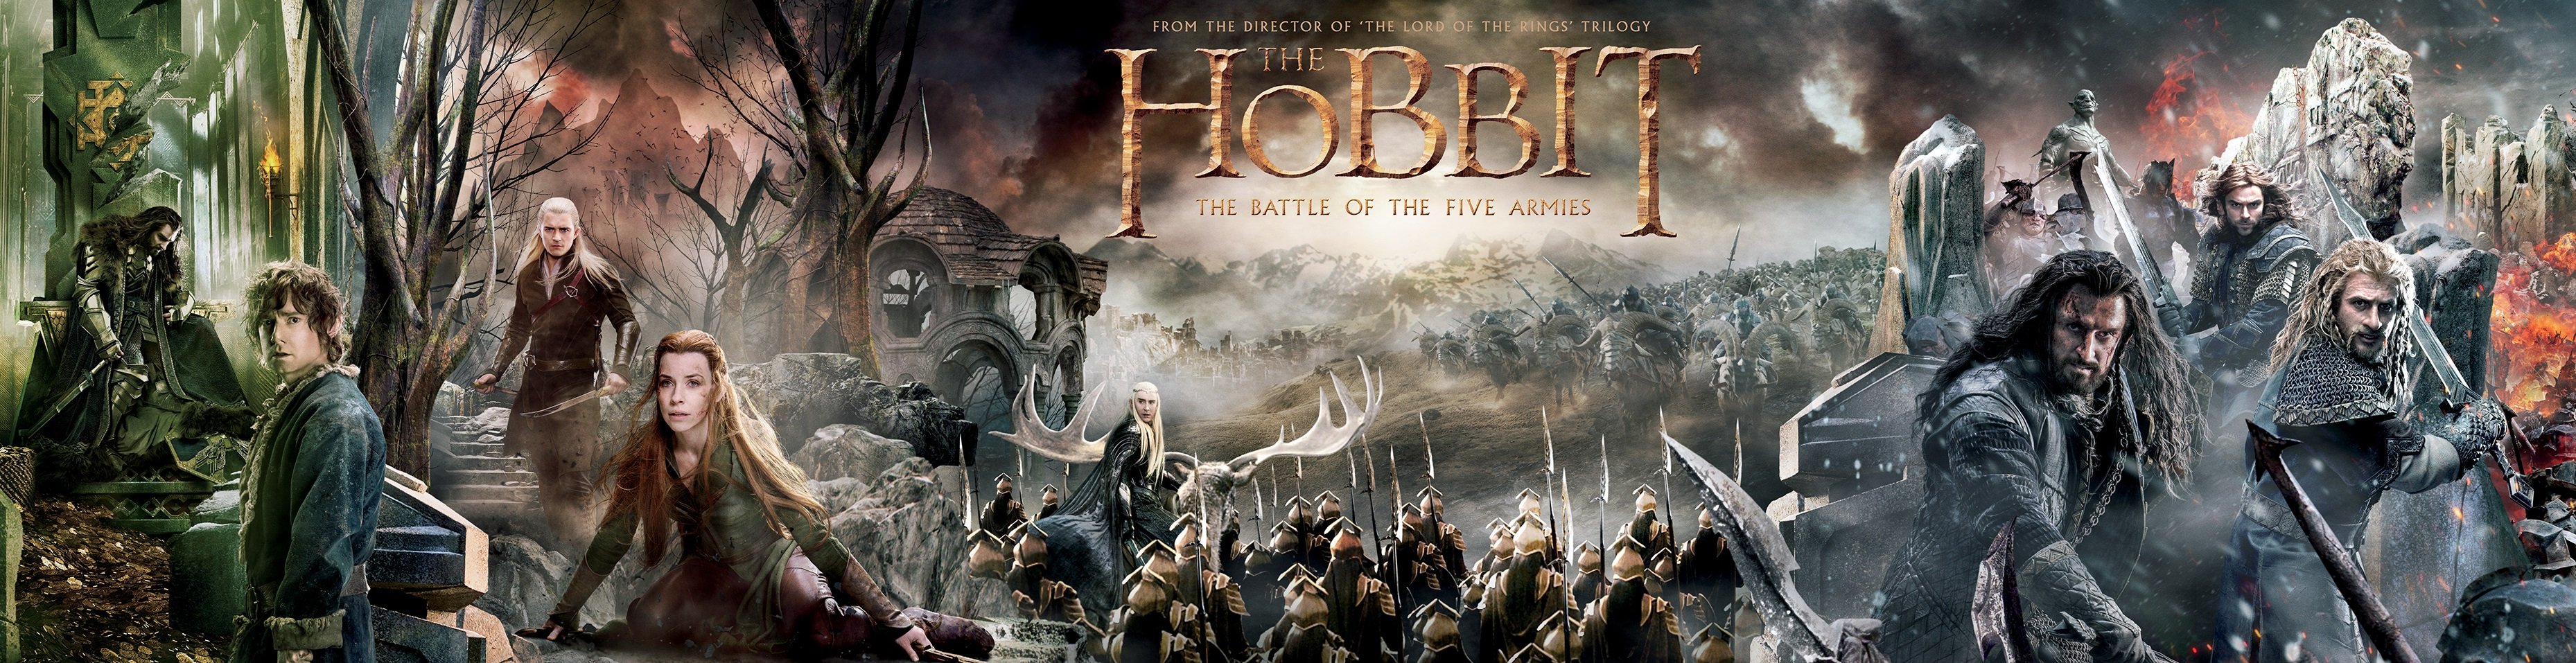 The Hobbit: The Battle of the Five Ar download the new version for windows